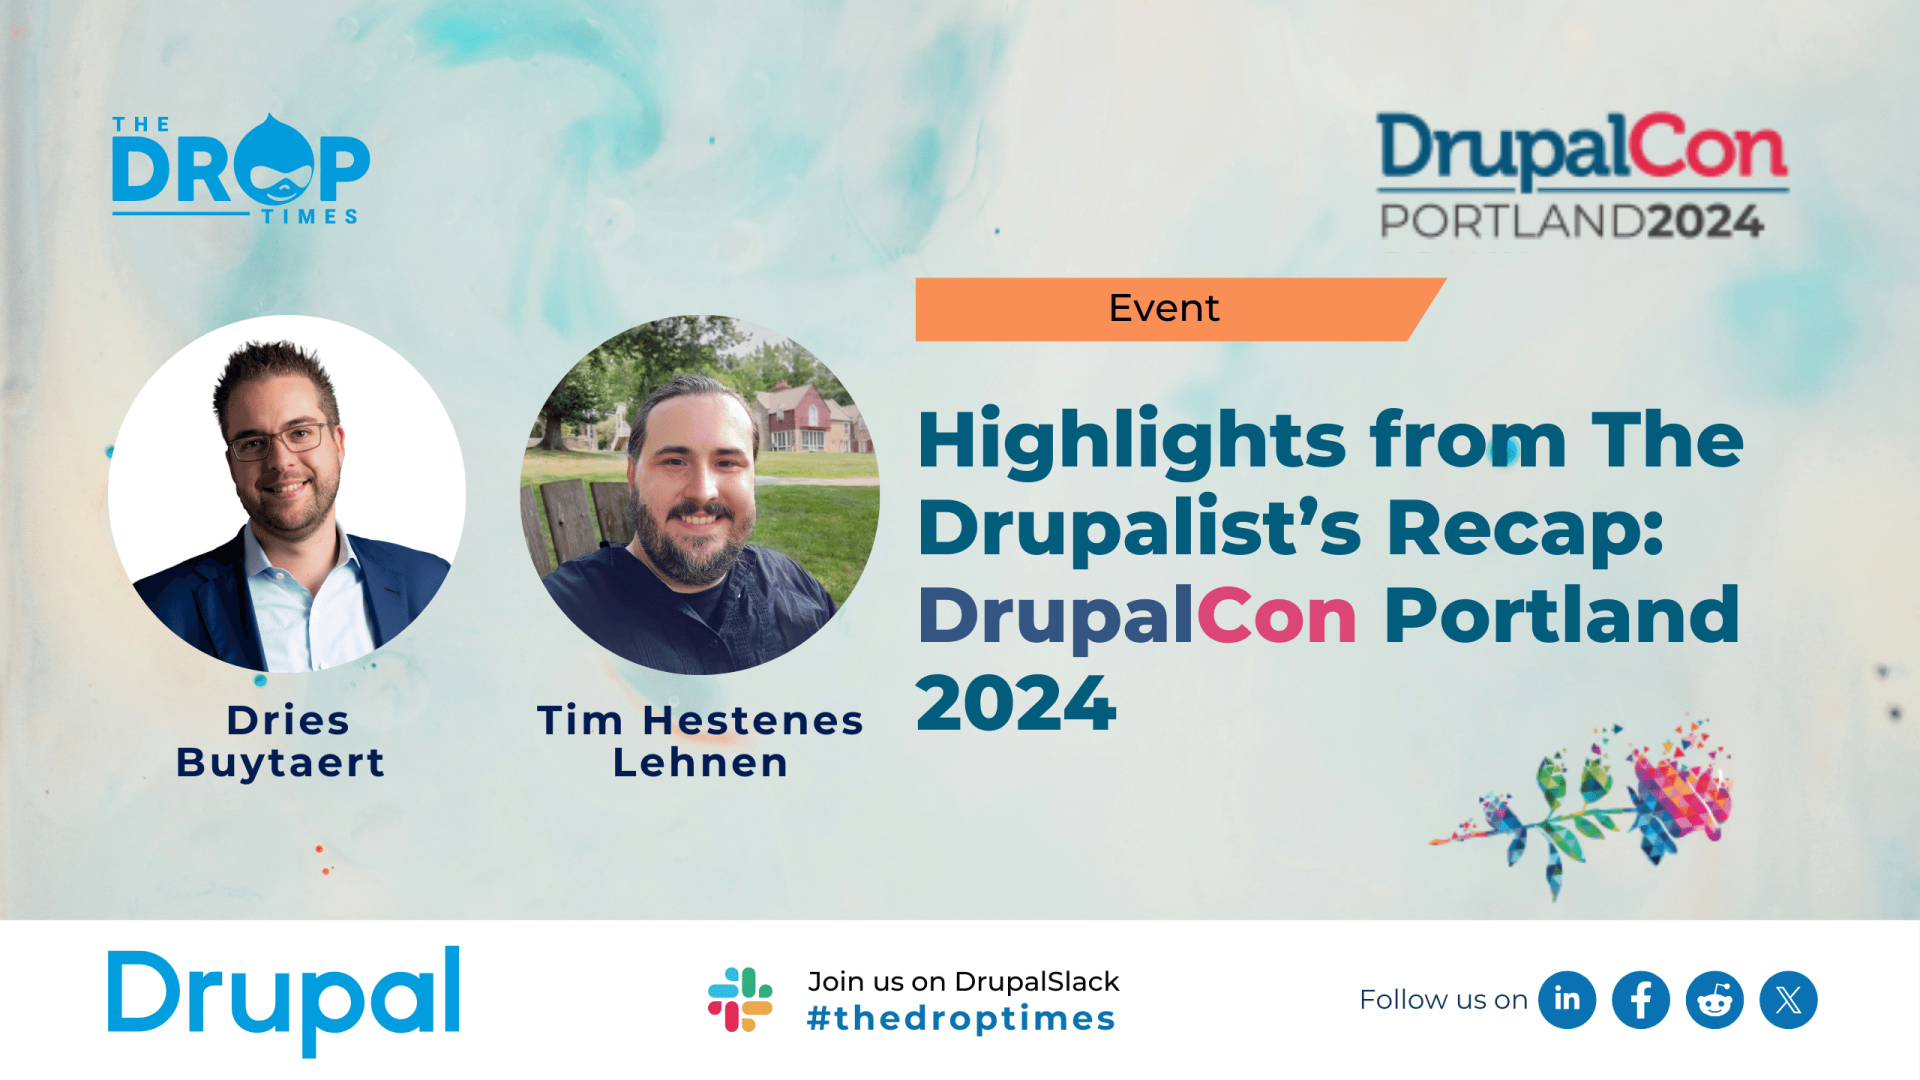 Highlights from The Drupalist’s Recap DrupalCon Portland 2024